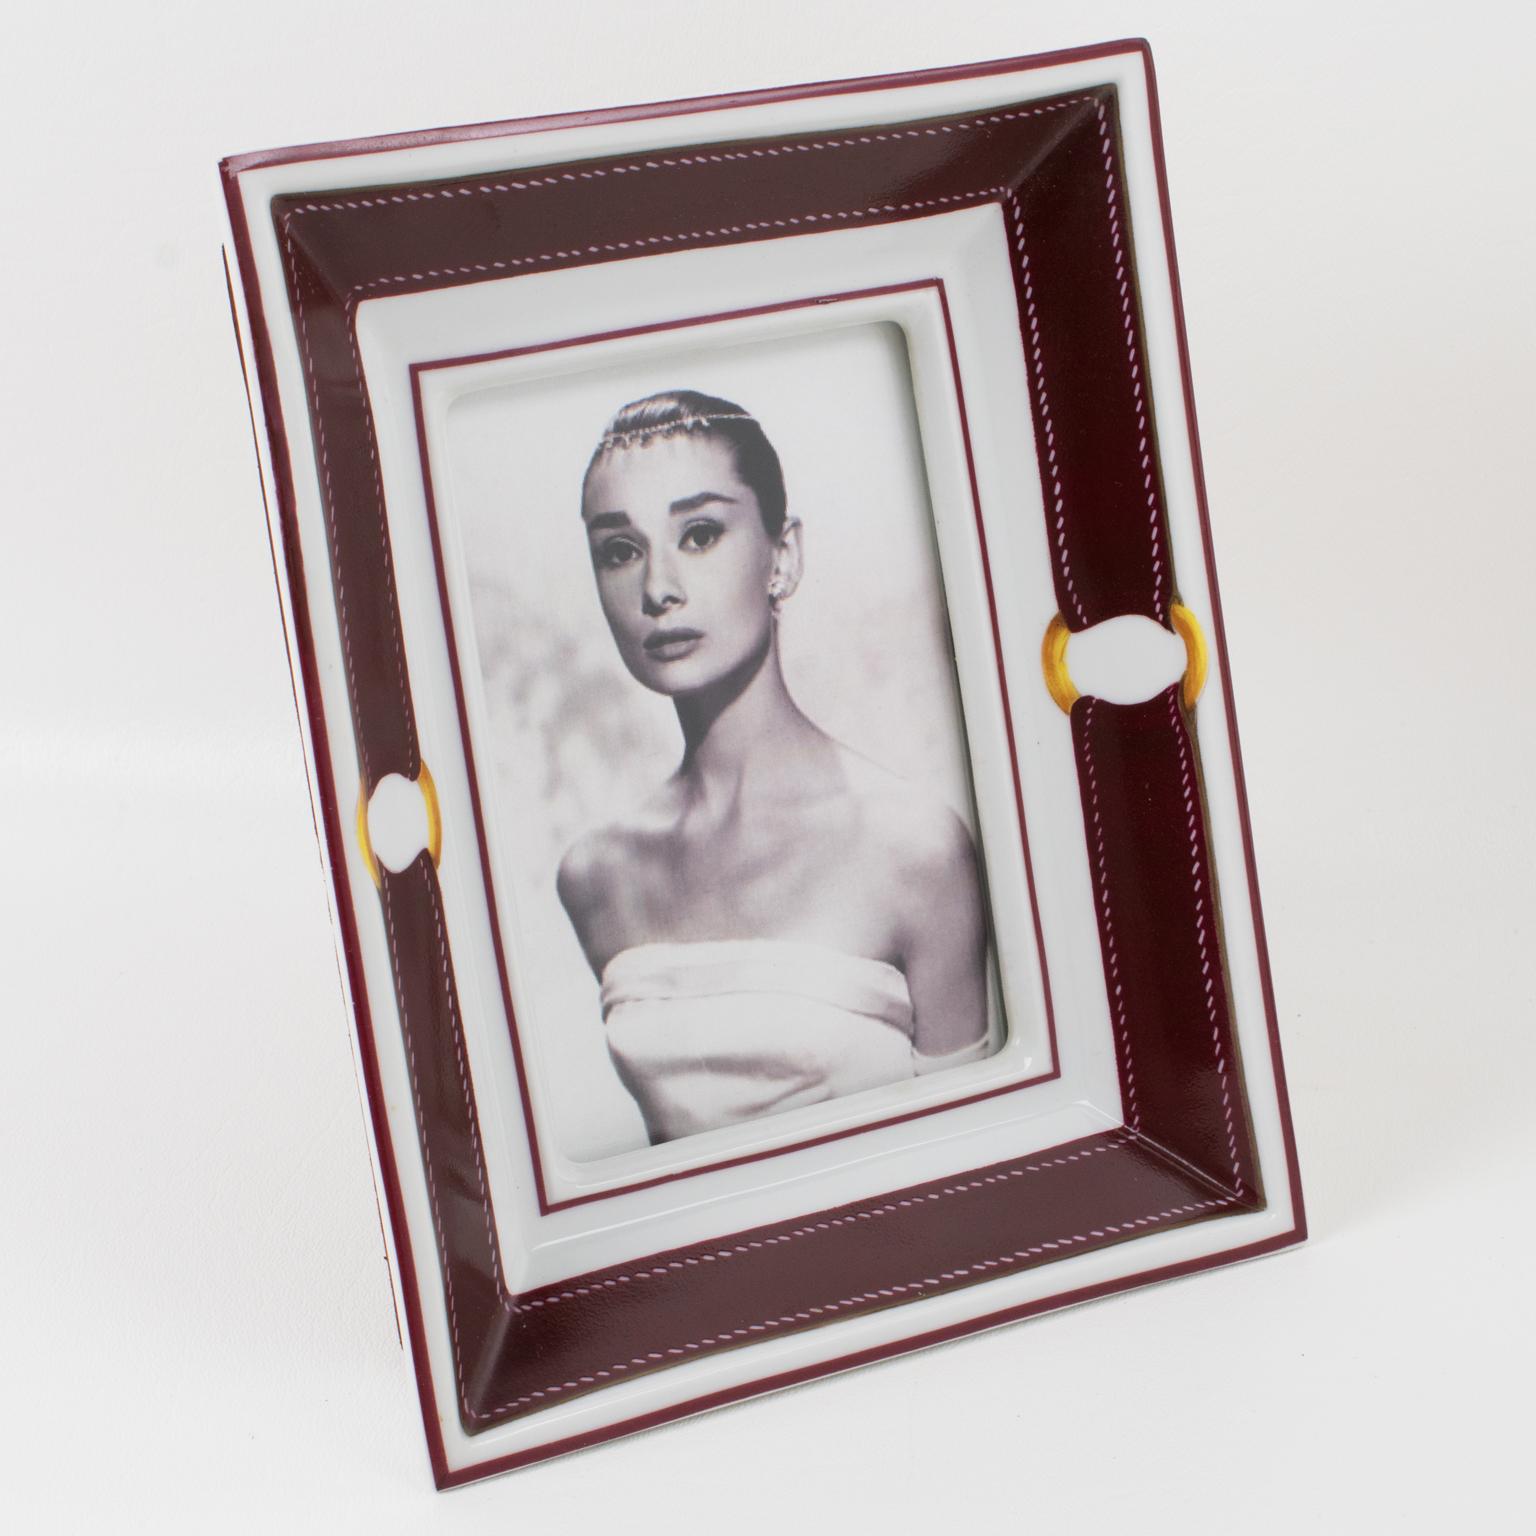 Hermes, Paris designs this superb and rare picture photo frame. Exclusively made for Hermes in Limoges, this timeless and elegant white porcelain picture frame is hand-decorated with Hermes' iconic buckle and strap in burgundy red and gold colors.